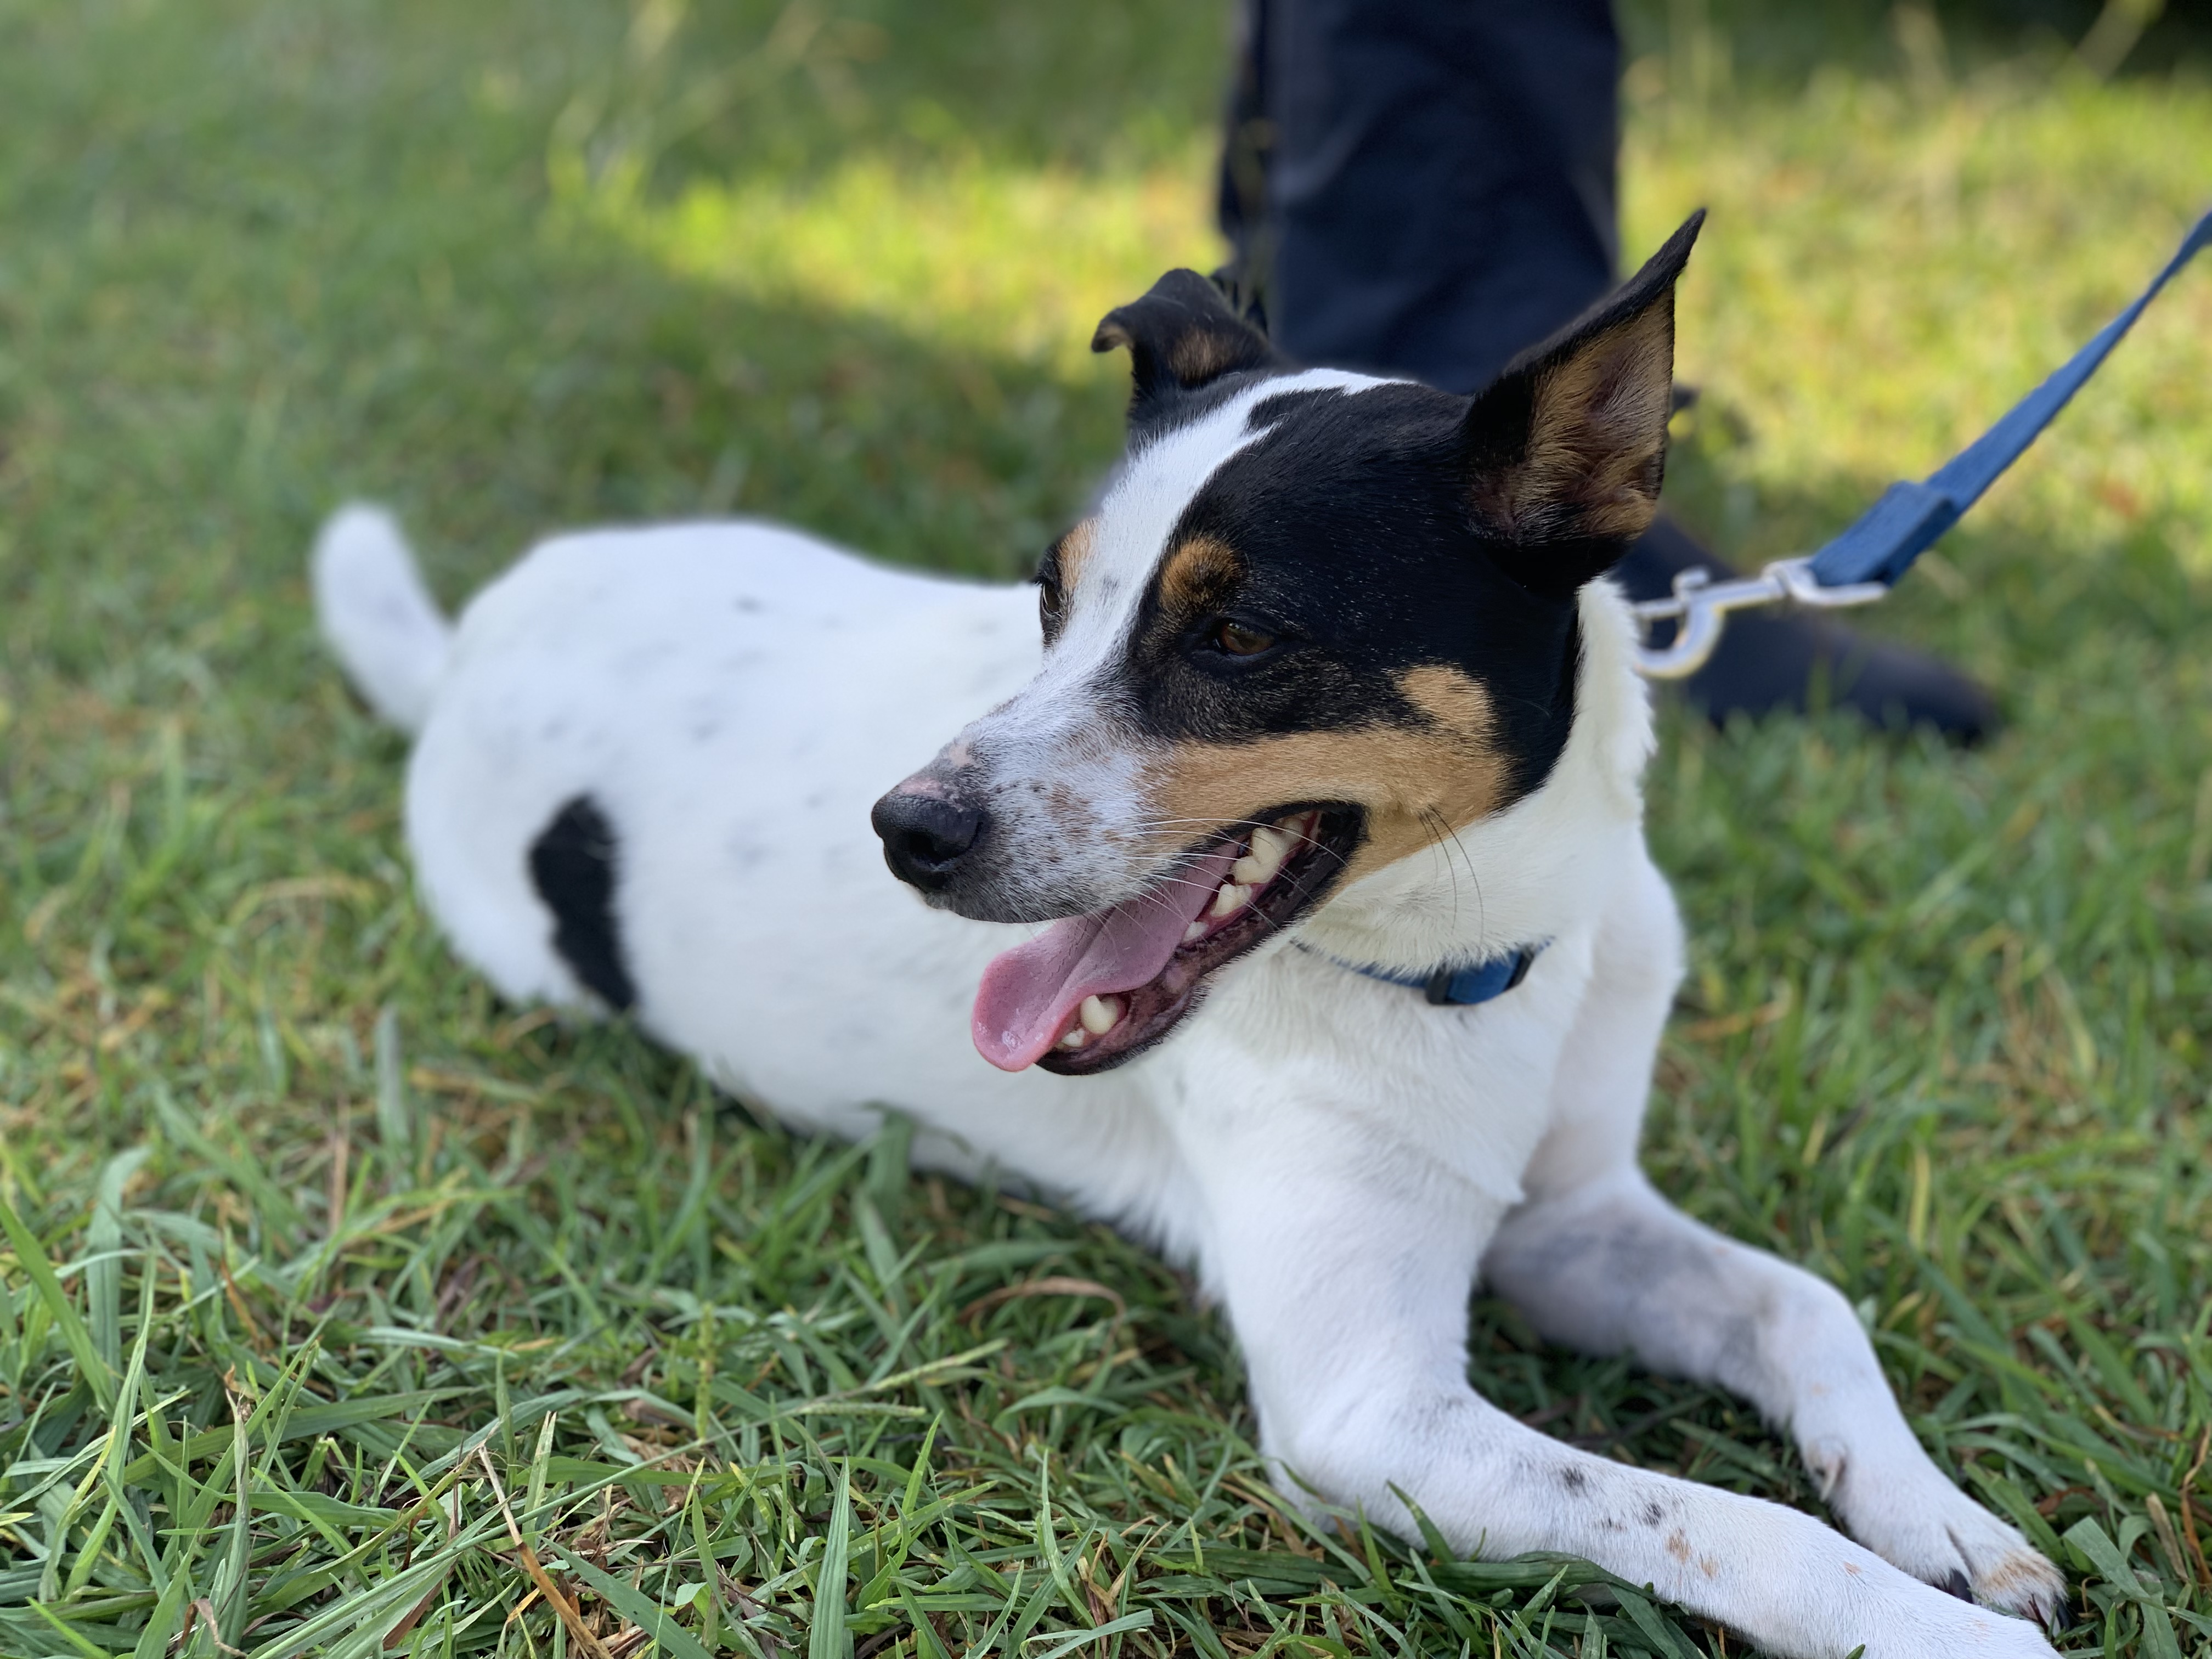 A black and white spotted dog with its tongue out lying on grass with its two legs stretched out in front. The dog has a blue collar and leash. 